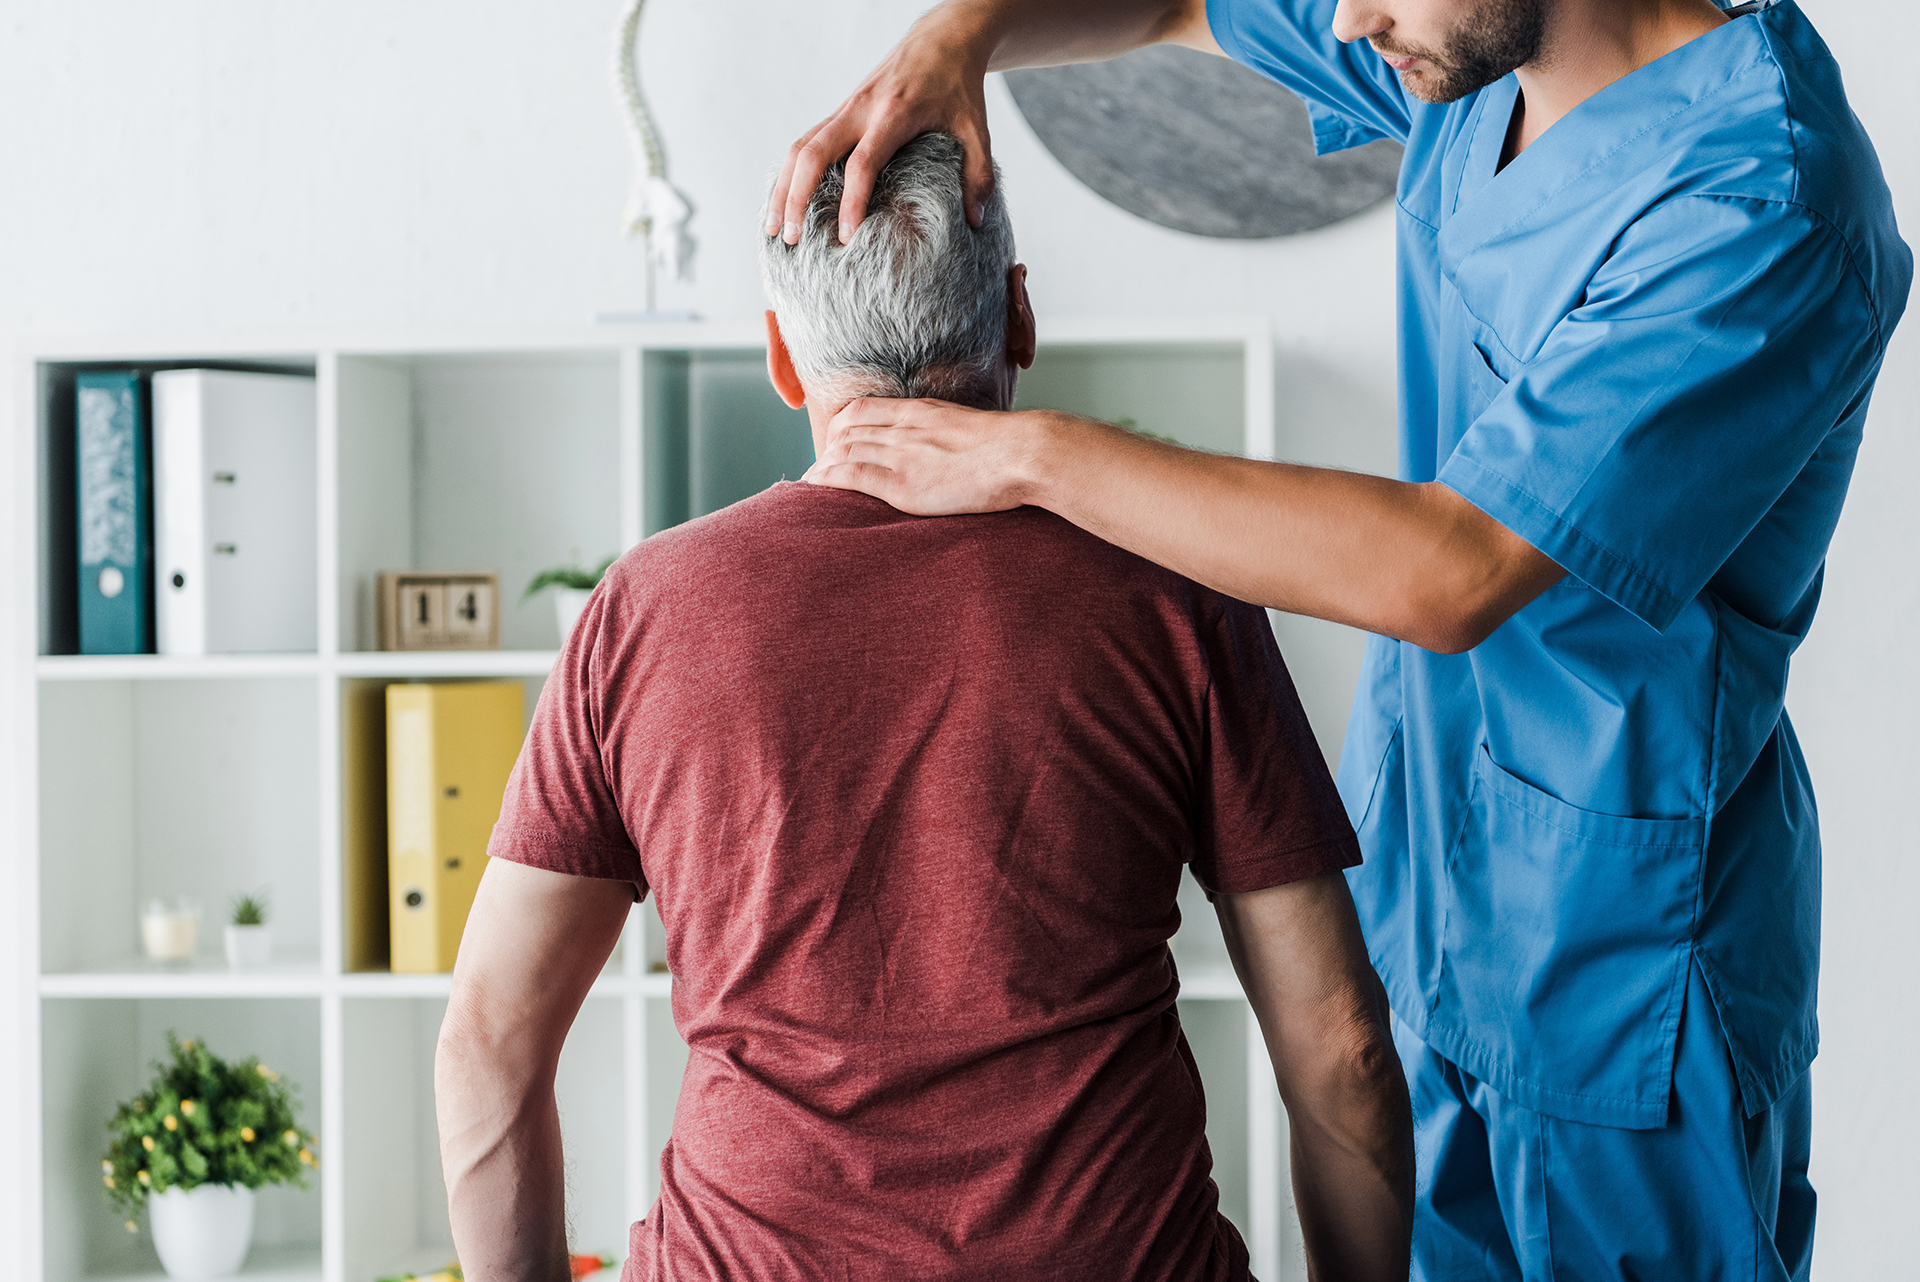 Experienced chiropractor holding a patient's head and neck to determine adjustment angles